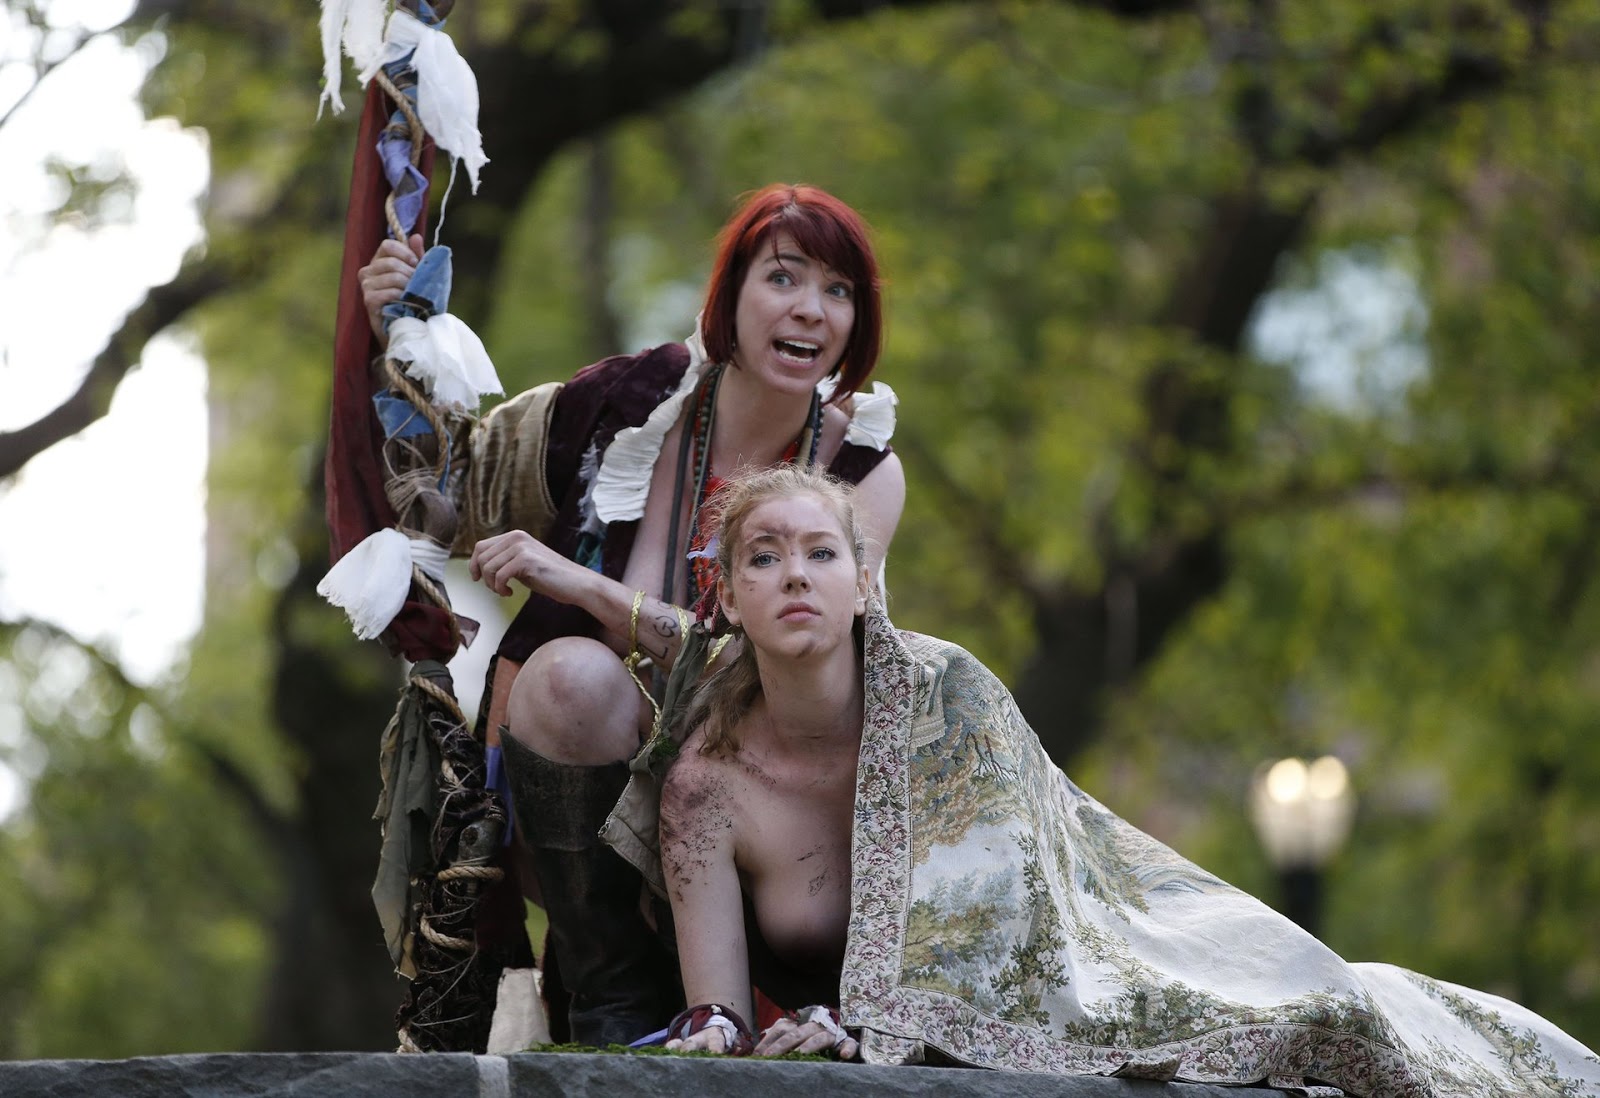 The Tempest performed naked in New York